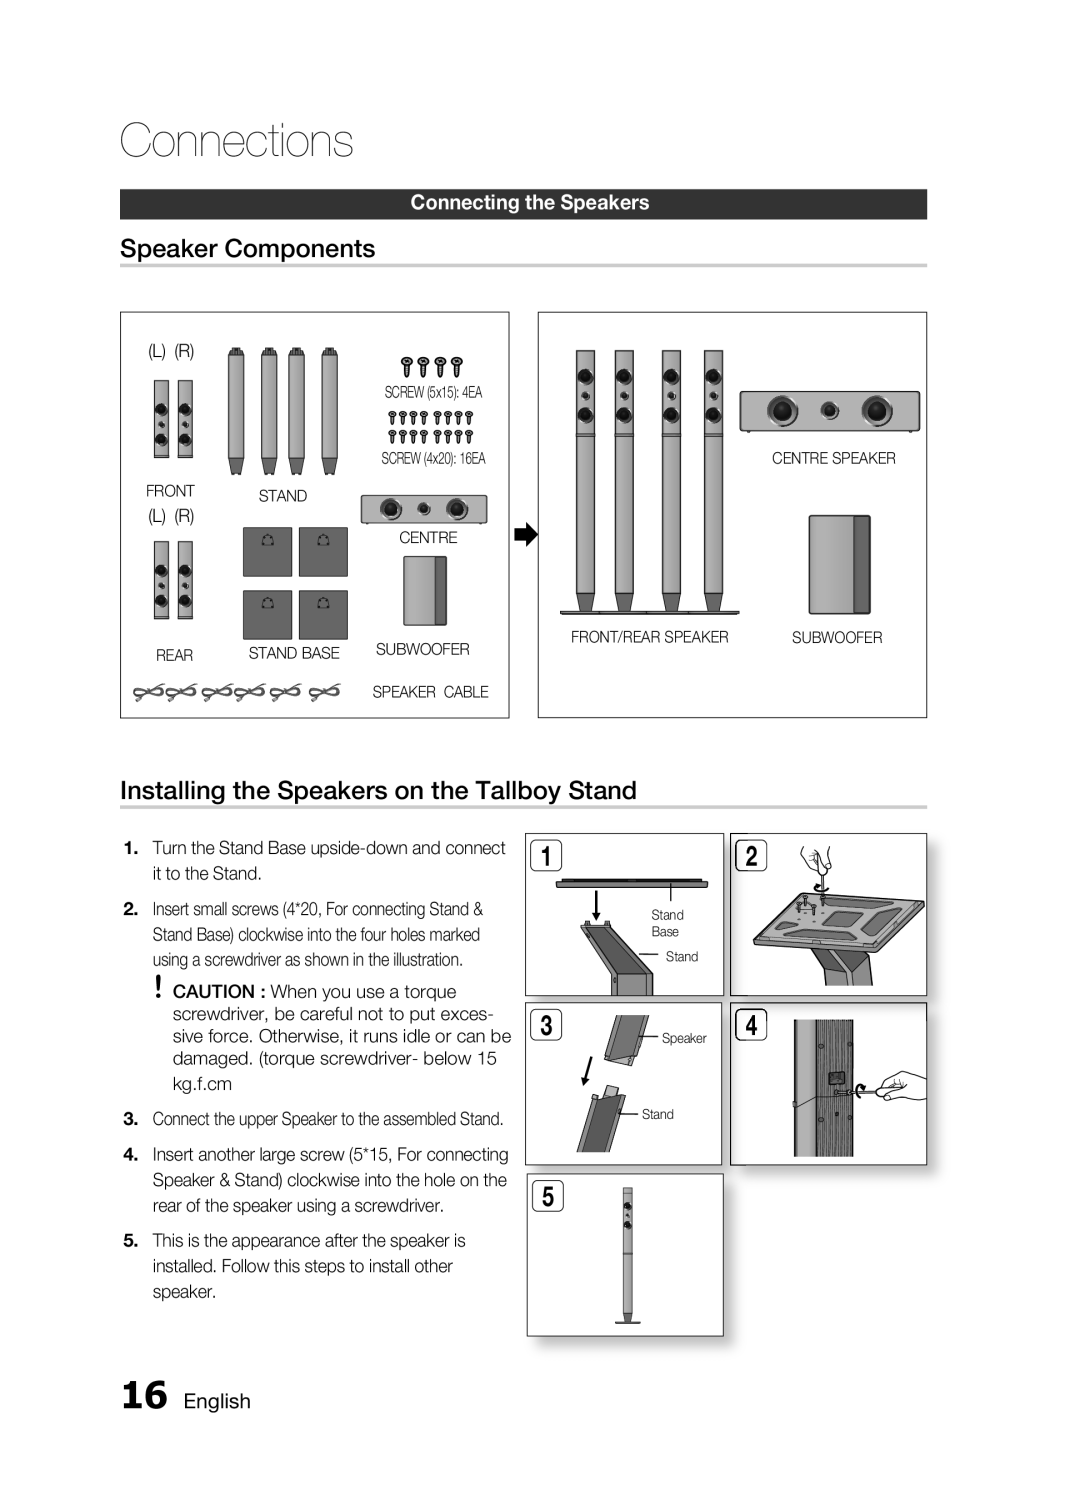 Samsung HT-C453N/UMG manual Speaker Components, Installing the Speakers on the Tallboy Stand, 1 English, Connections 